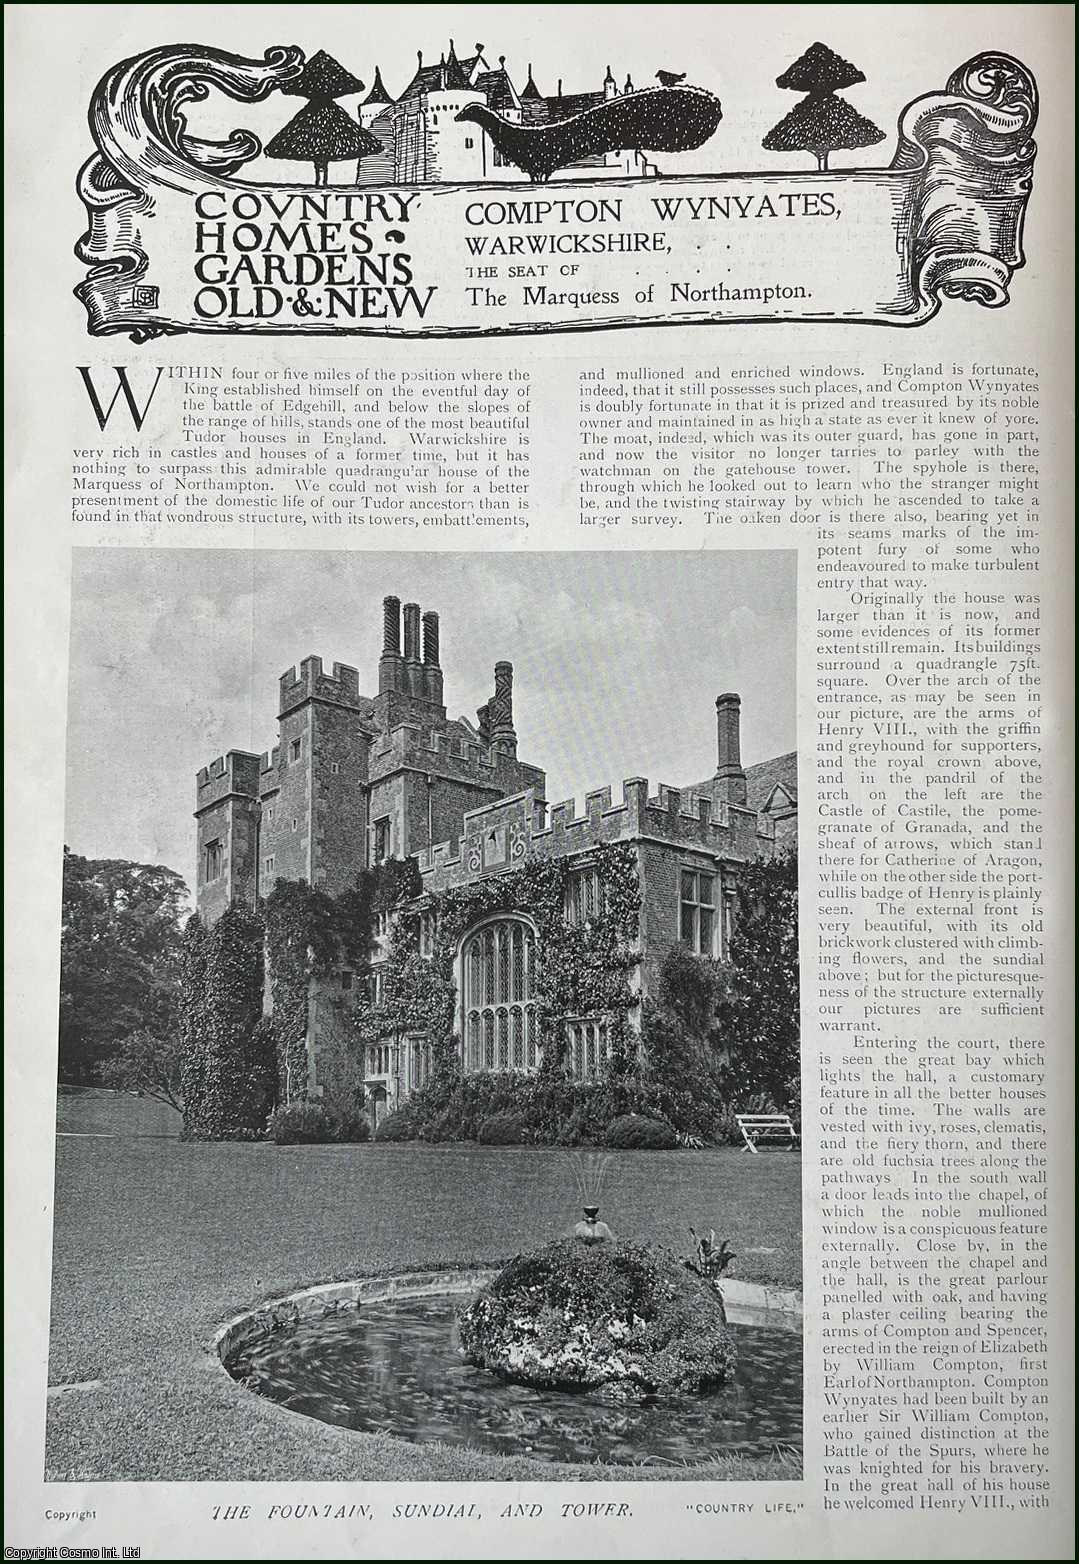 Country Life Magazine - 1901. Compton Wynyates, Warwickshire. Several pictures and accompanying text, removed from an original issue of Country Life Magazine, 1901.